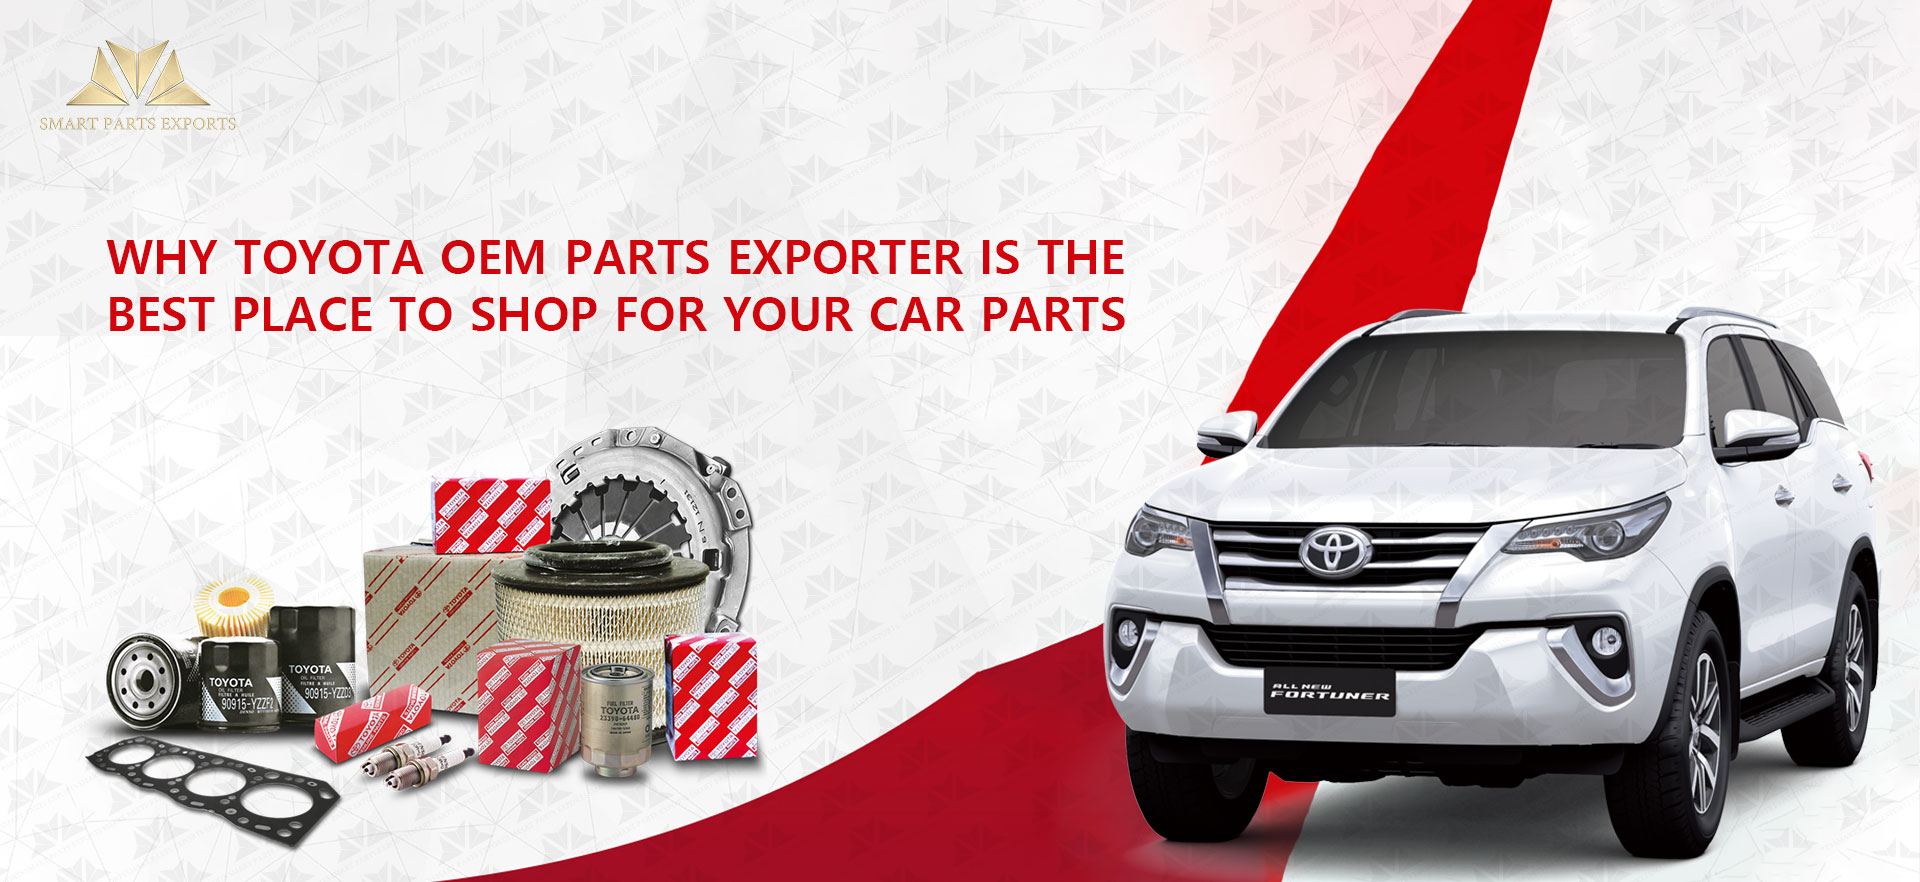 Why Toyota OEM Parts Exporter is the Best Place to Shop for Your Car Parts